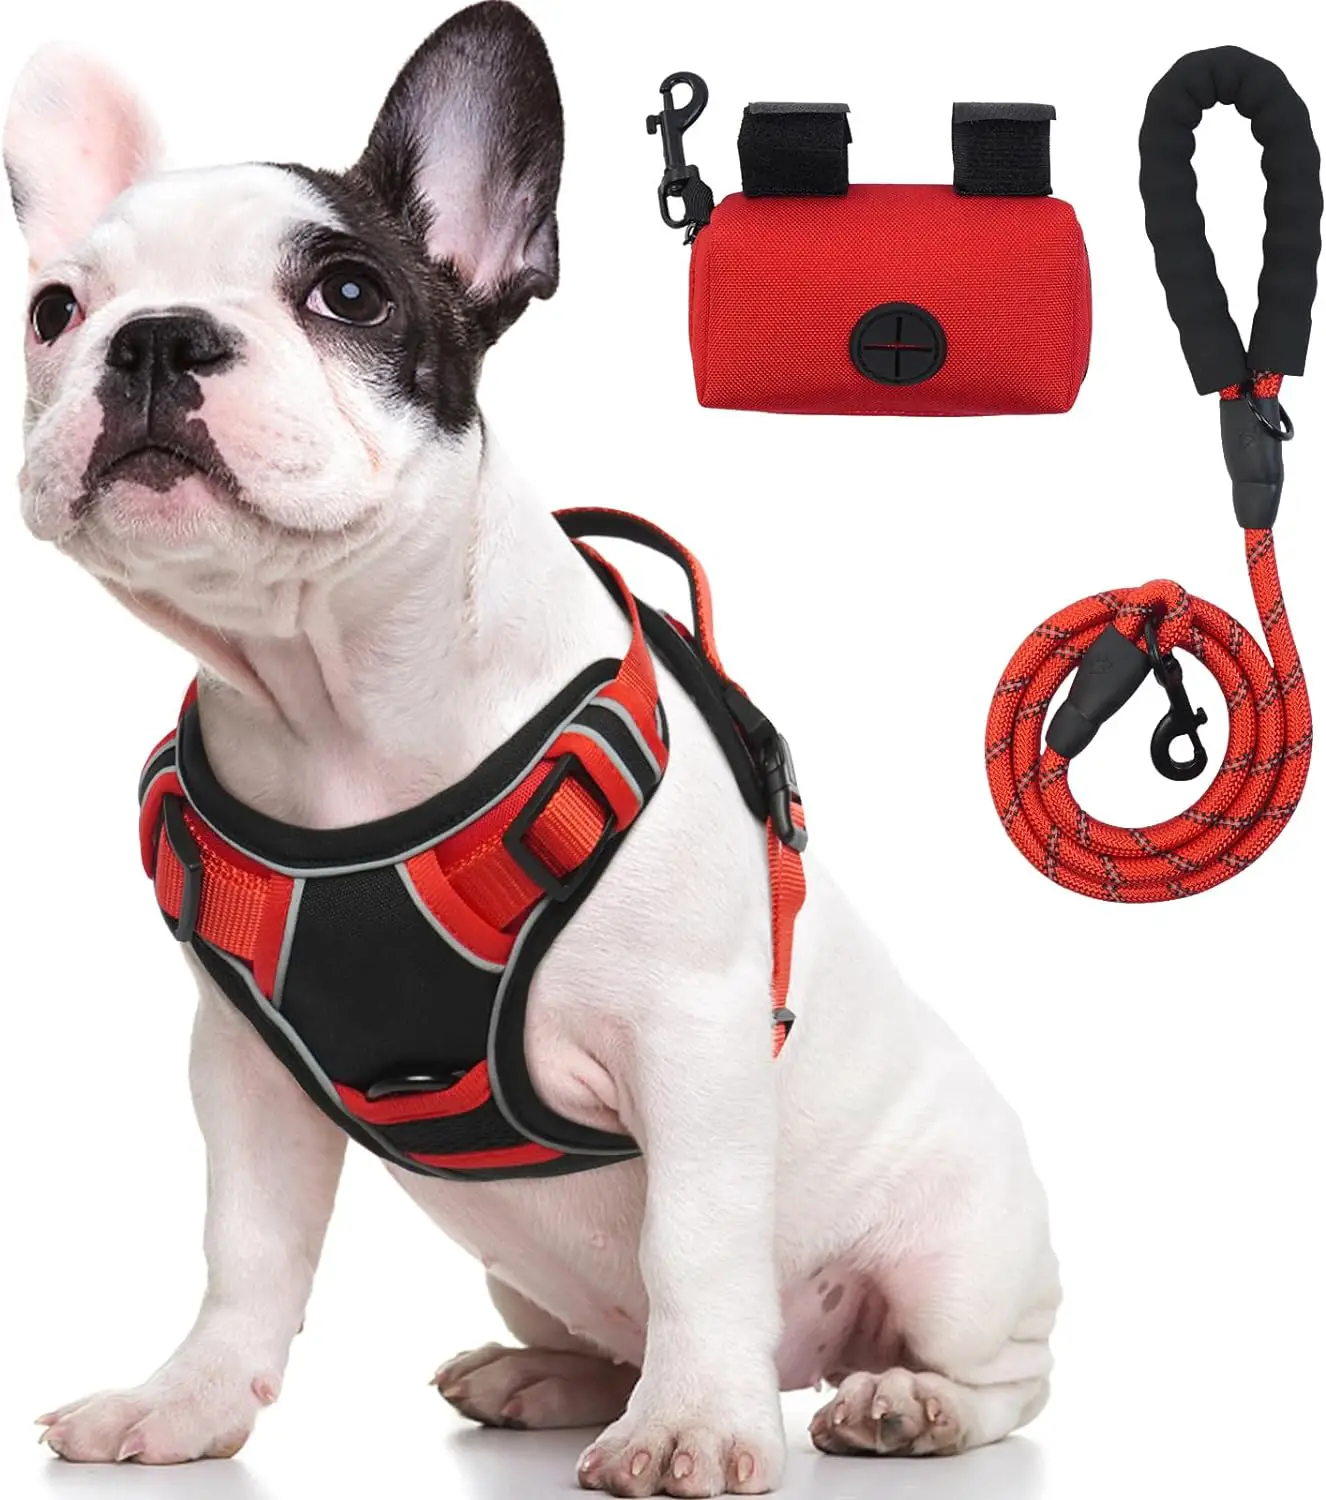 Kuoser Dog Harness, Dog Harness for Small Dogs, No Pull Reflective Puppy Harness, Soft Padded Choke Free Pet Vest with Easy Control Handle 2 Metal Rings 2 Buckles (Red S)